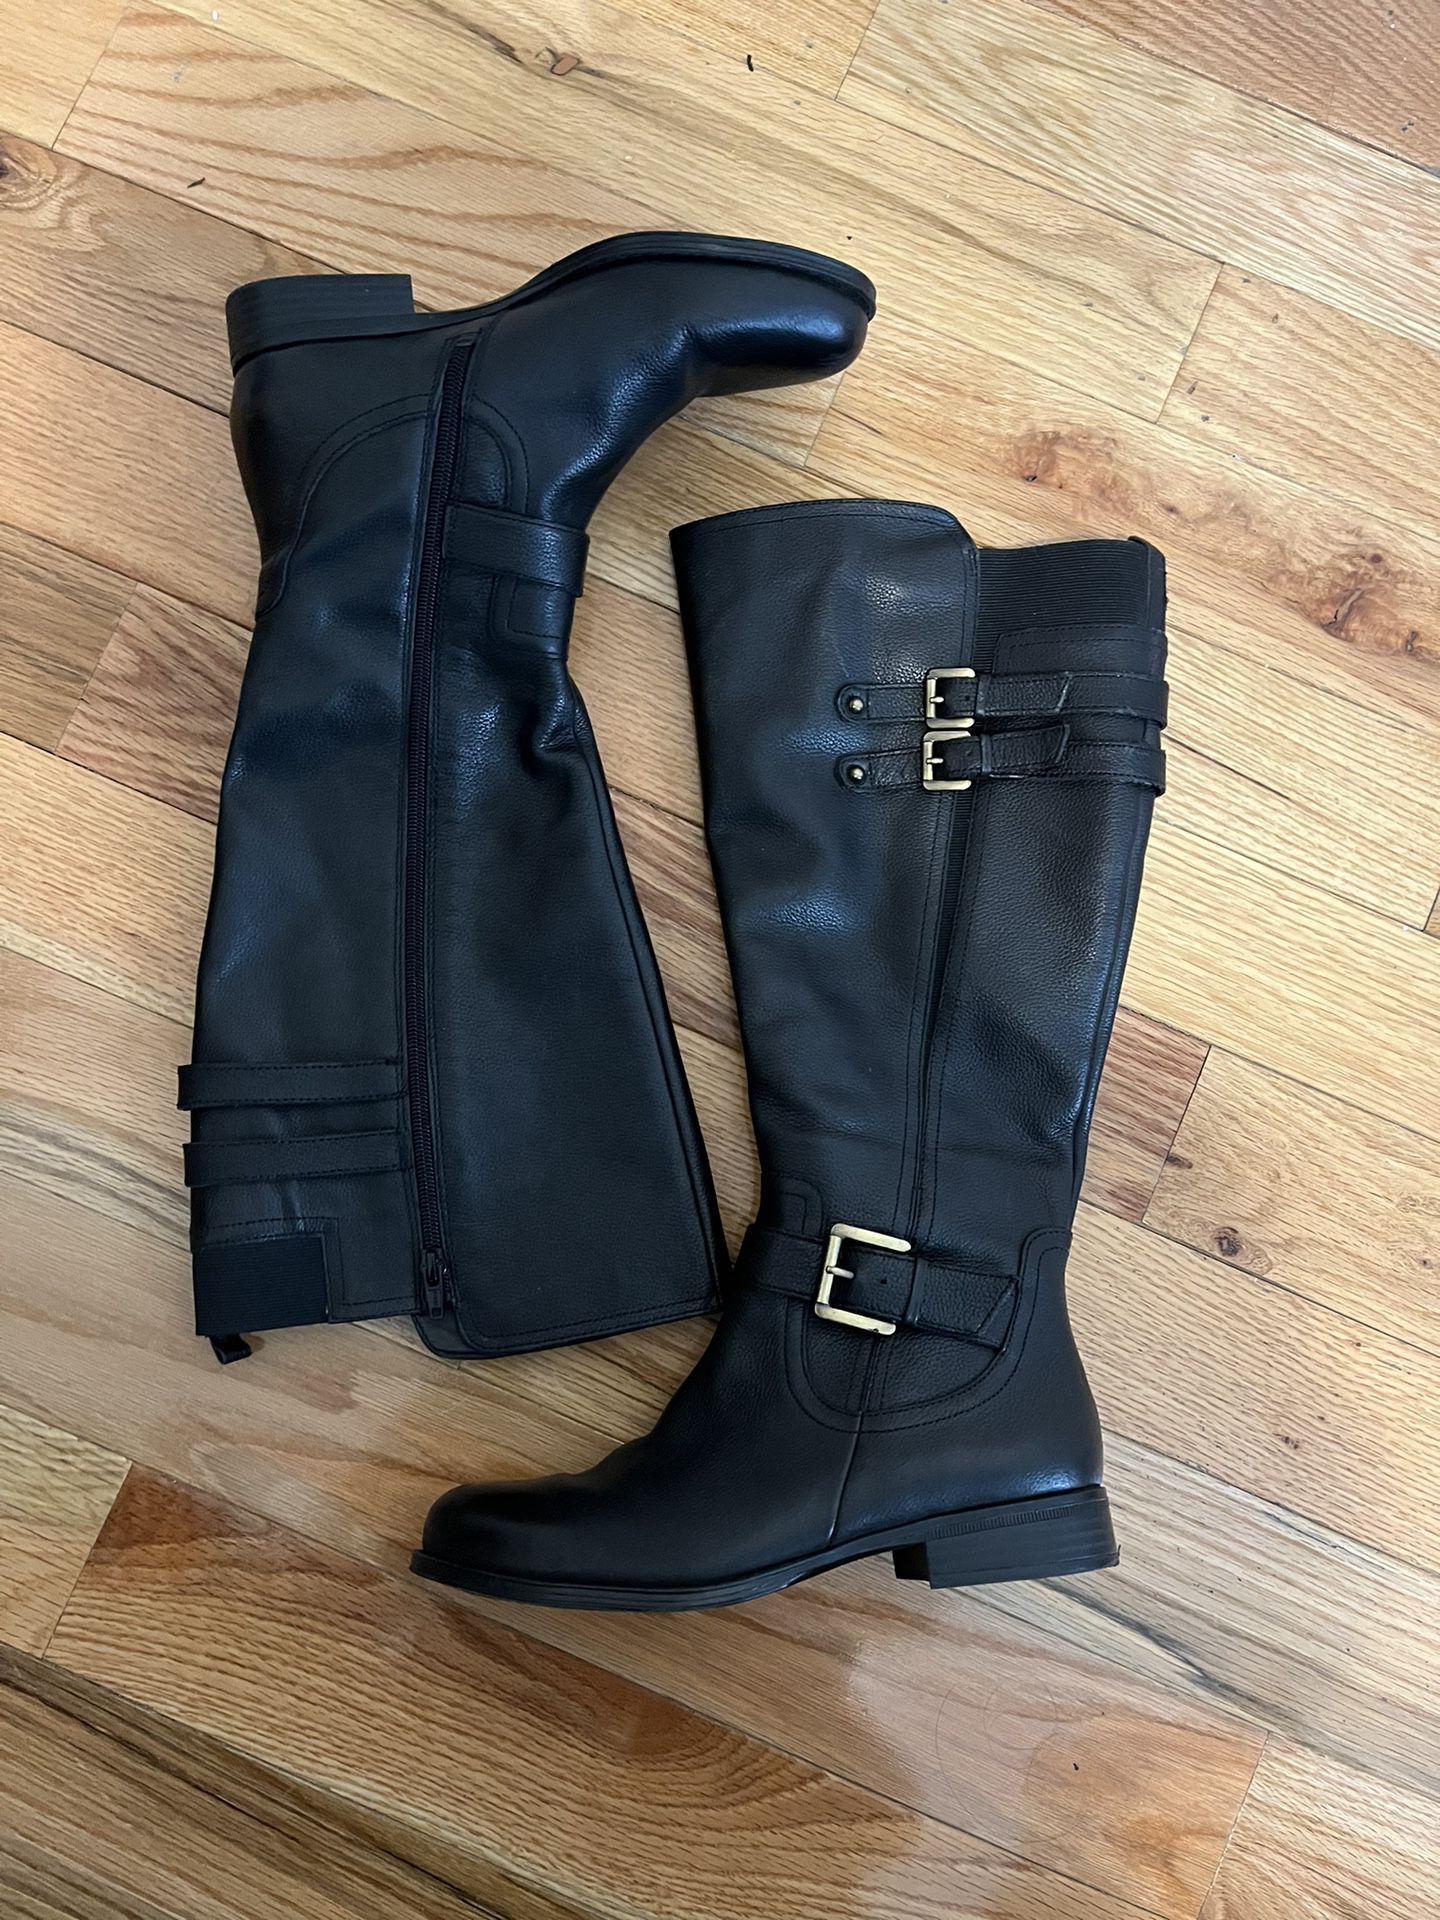 Size 8 Black Leather Knee High Boots